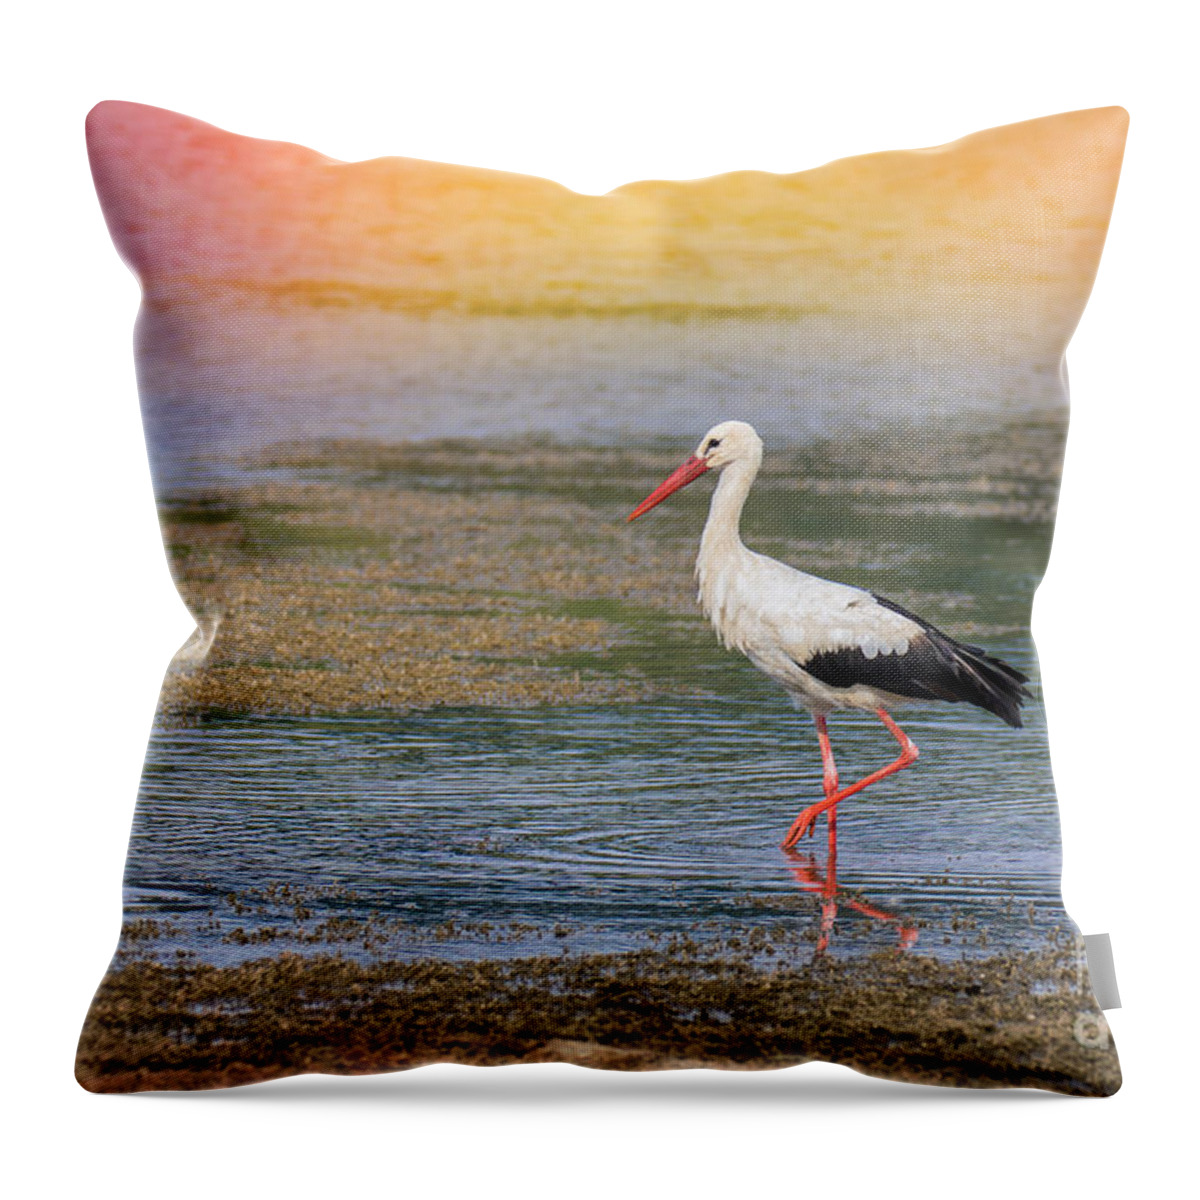 Animal Throw Pillow featuring the photograph Walking by Jivko Nakev